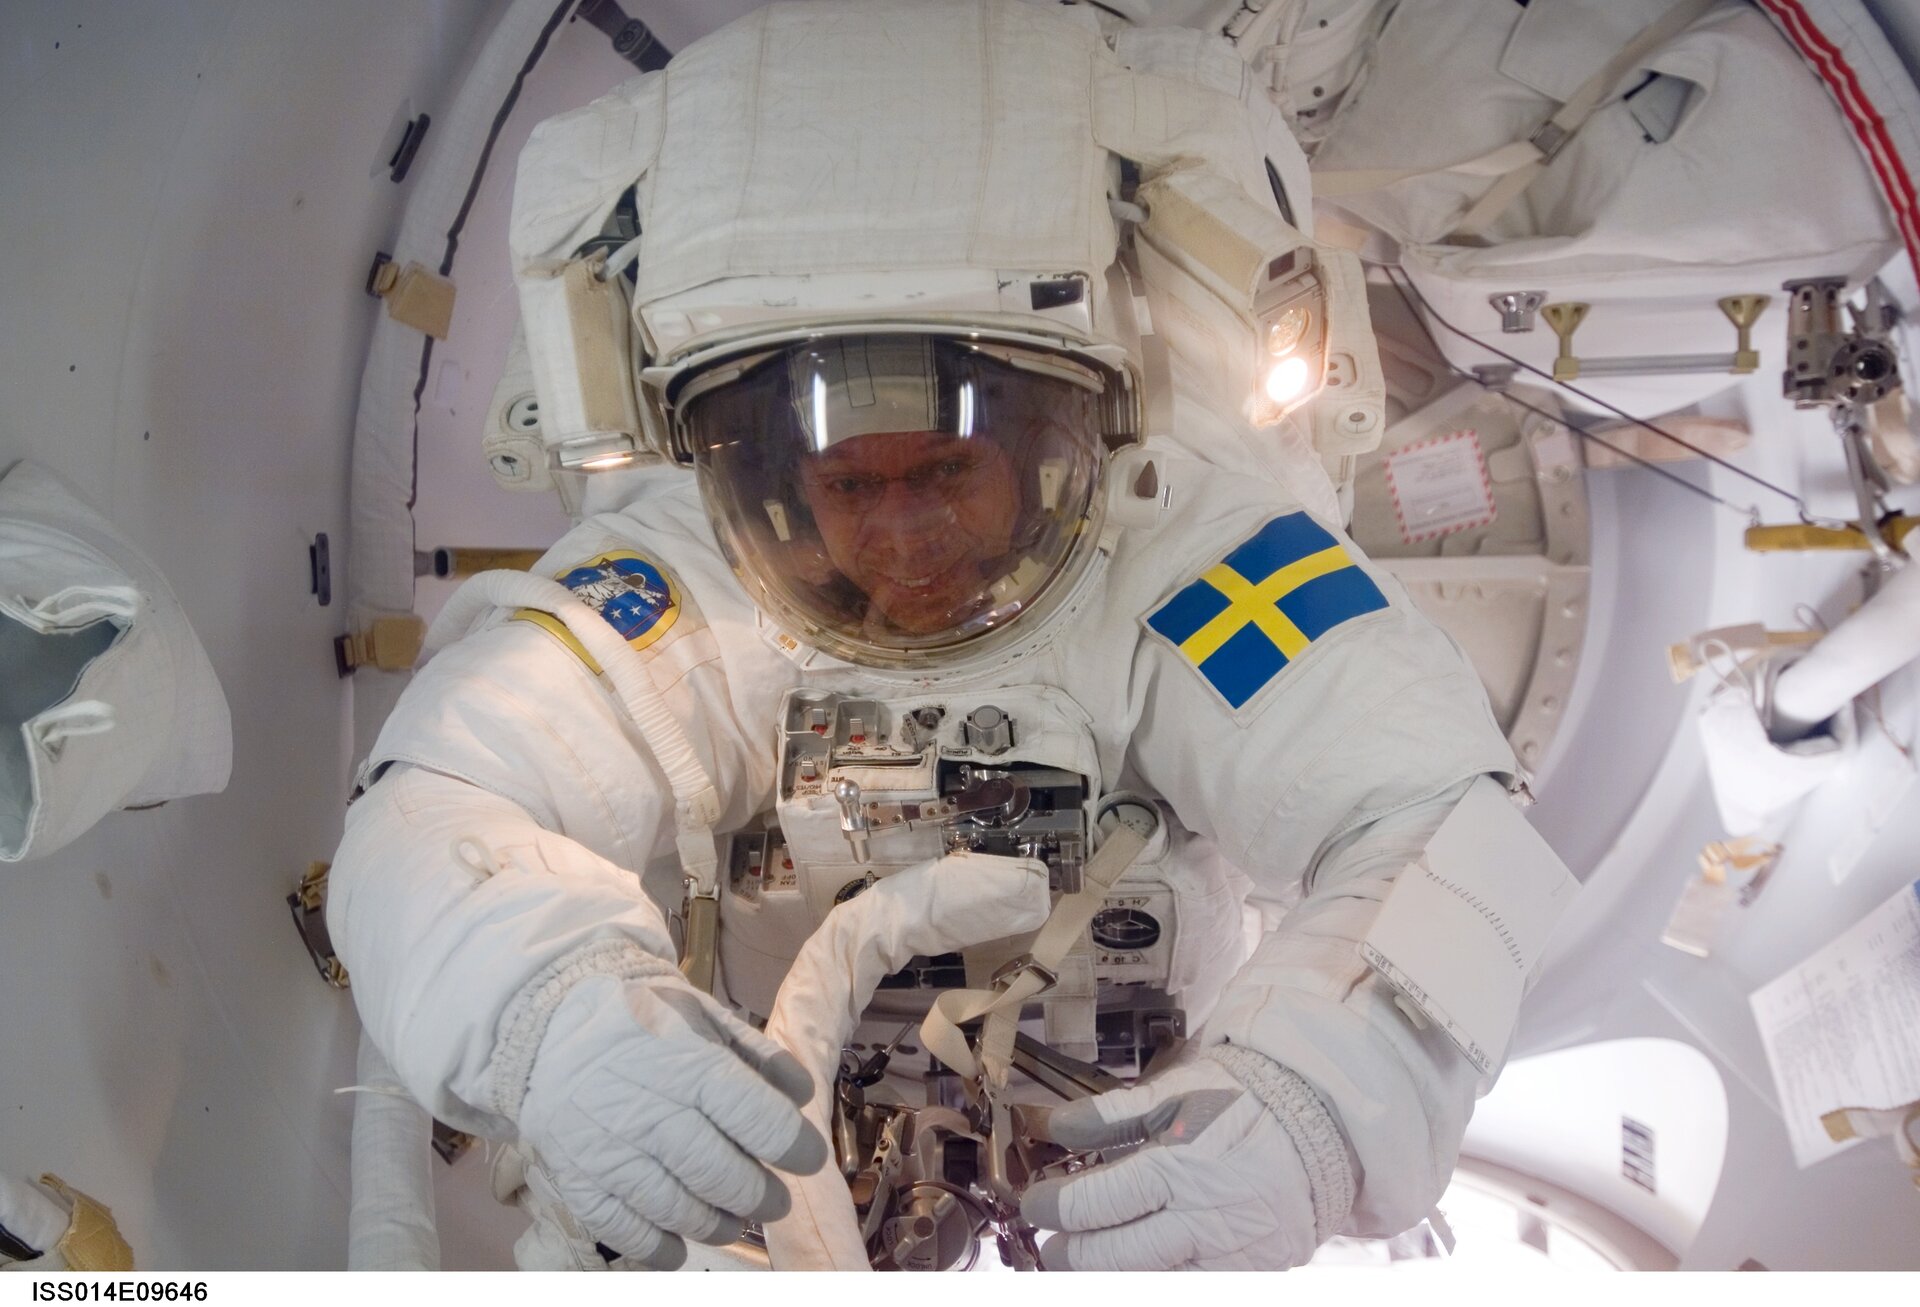 Looking for talented individuals to join the European Astronaut Corps